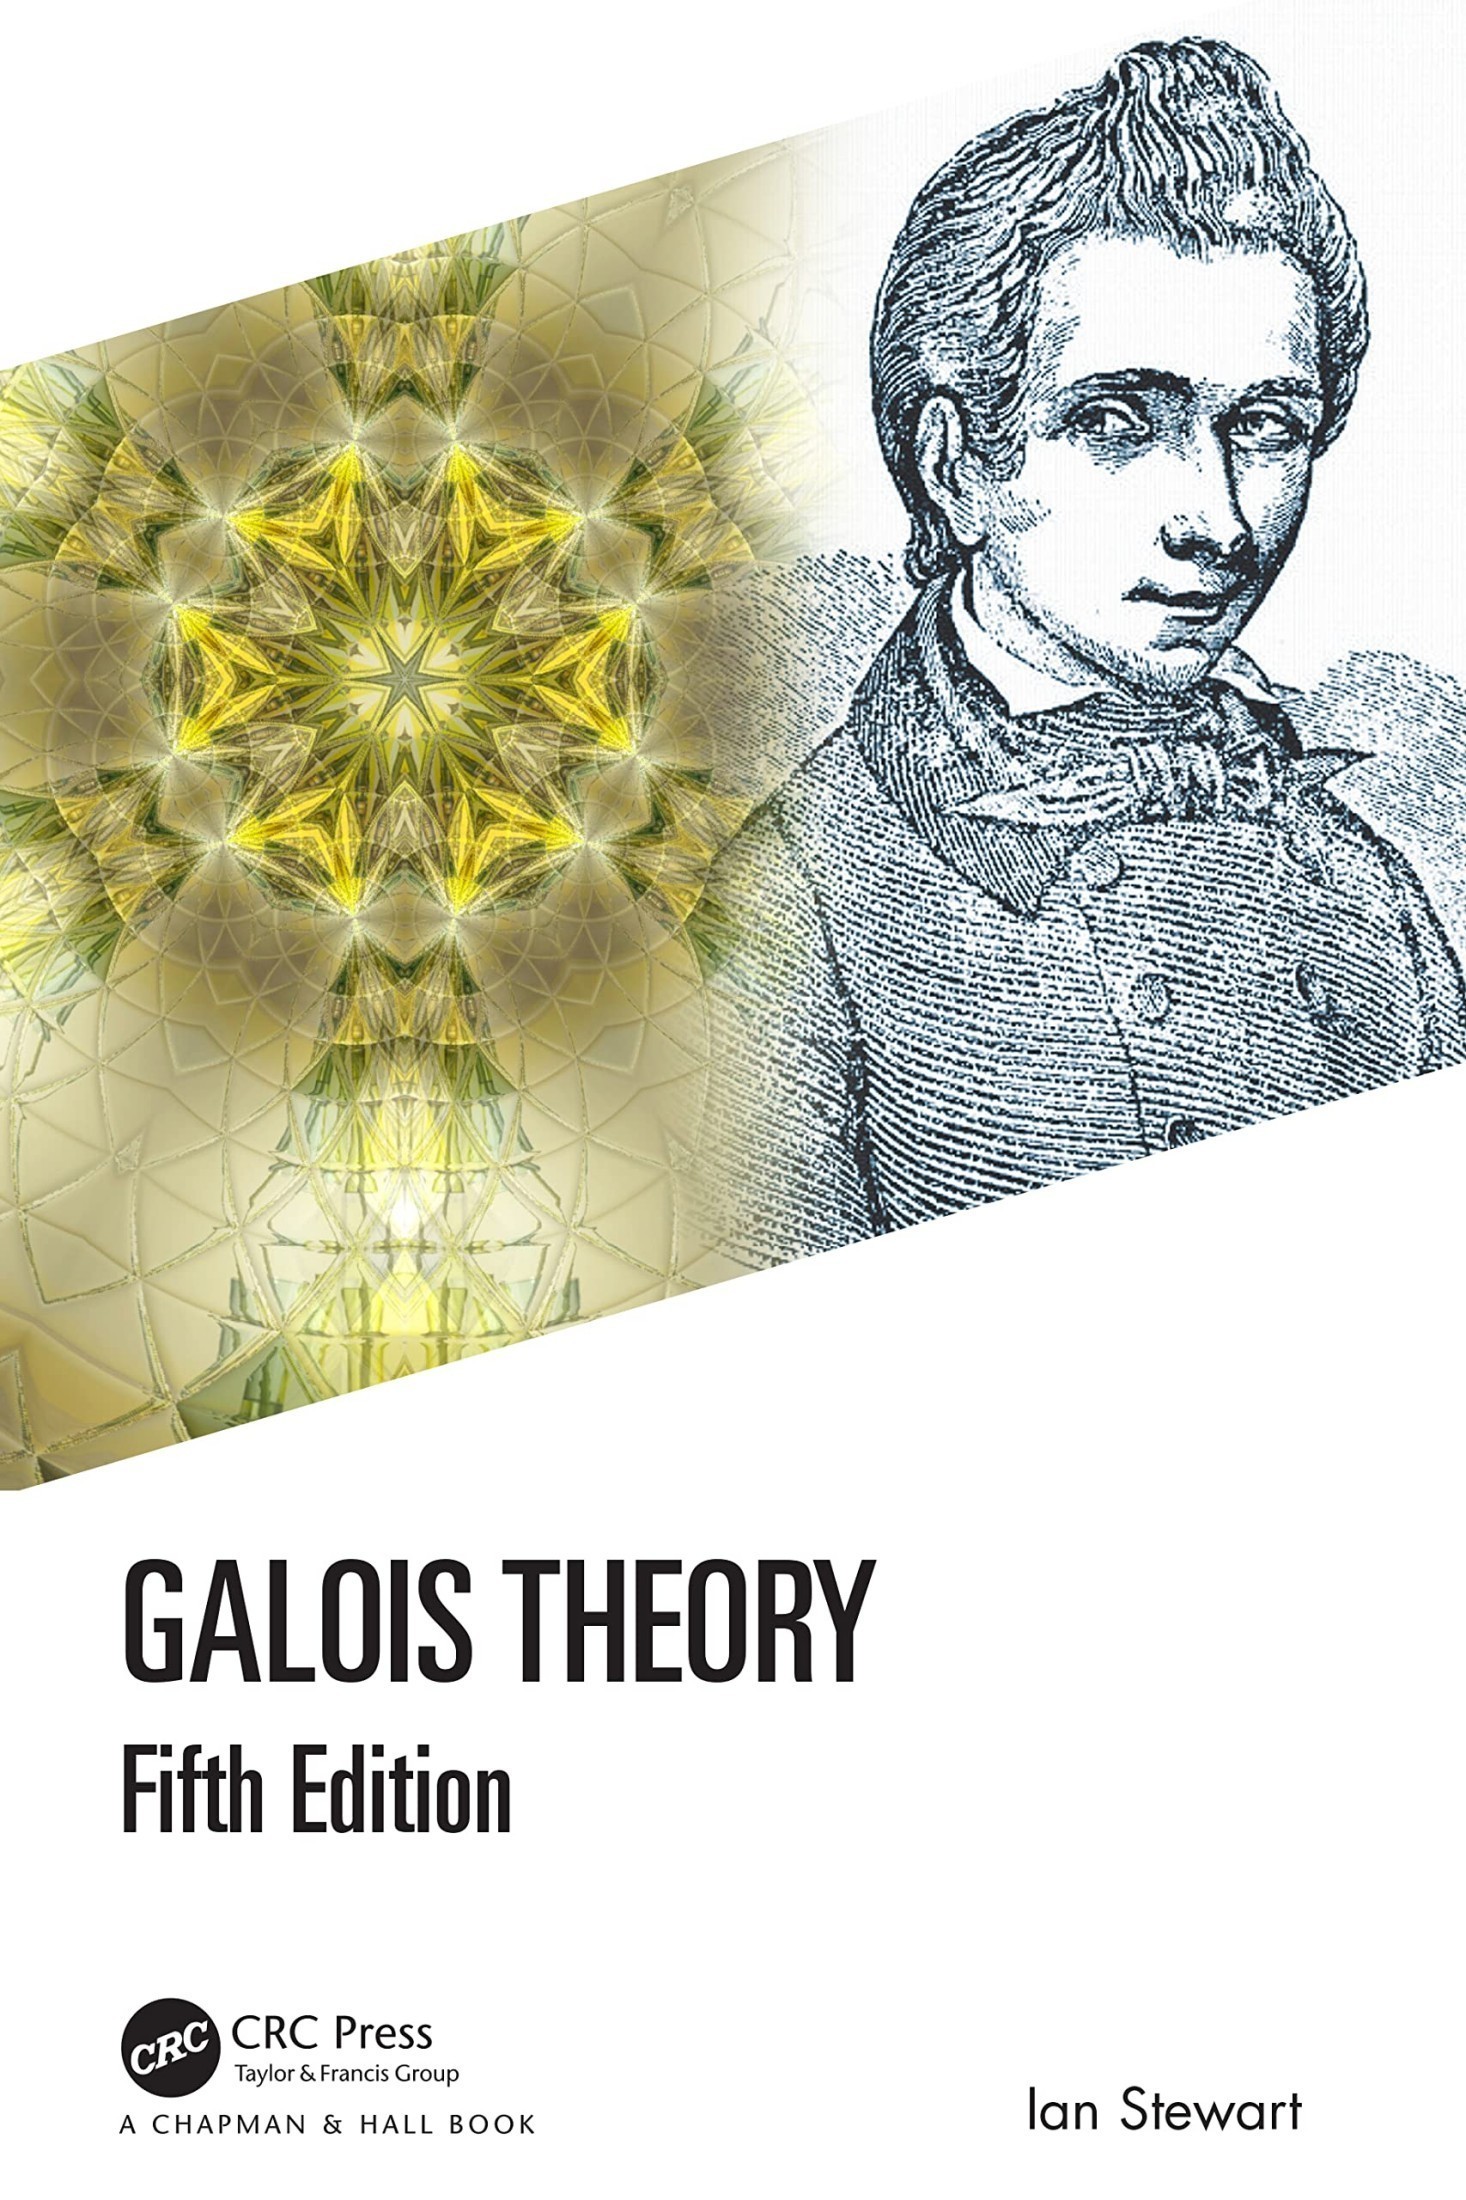 Galois Theory 5th Edition